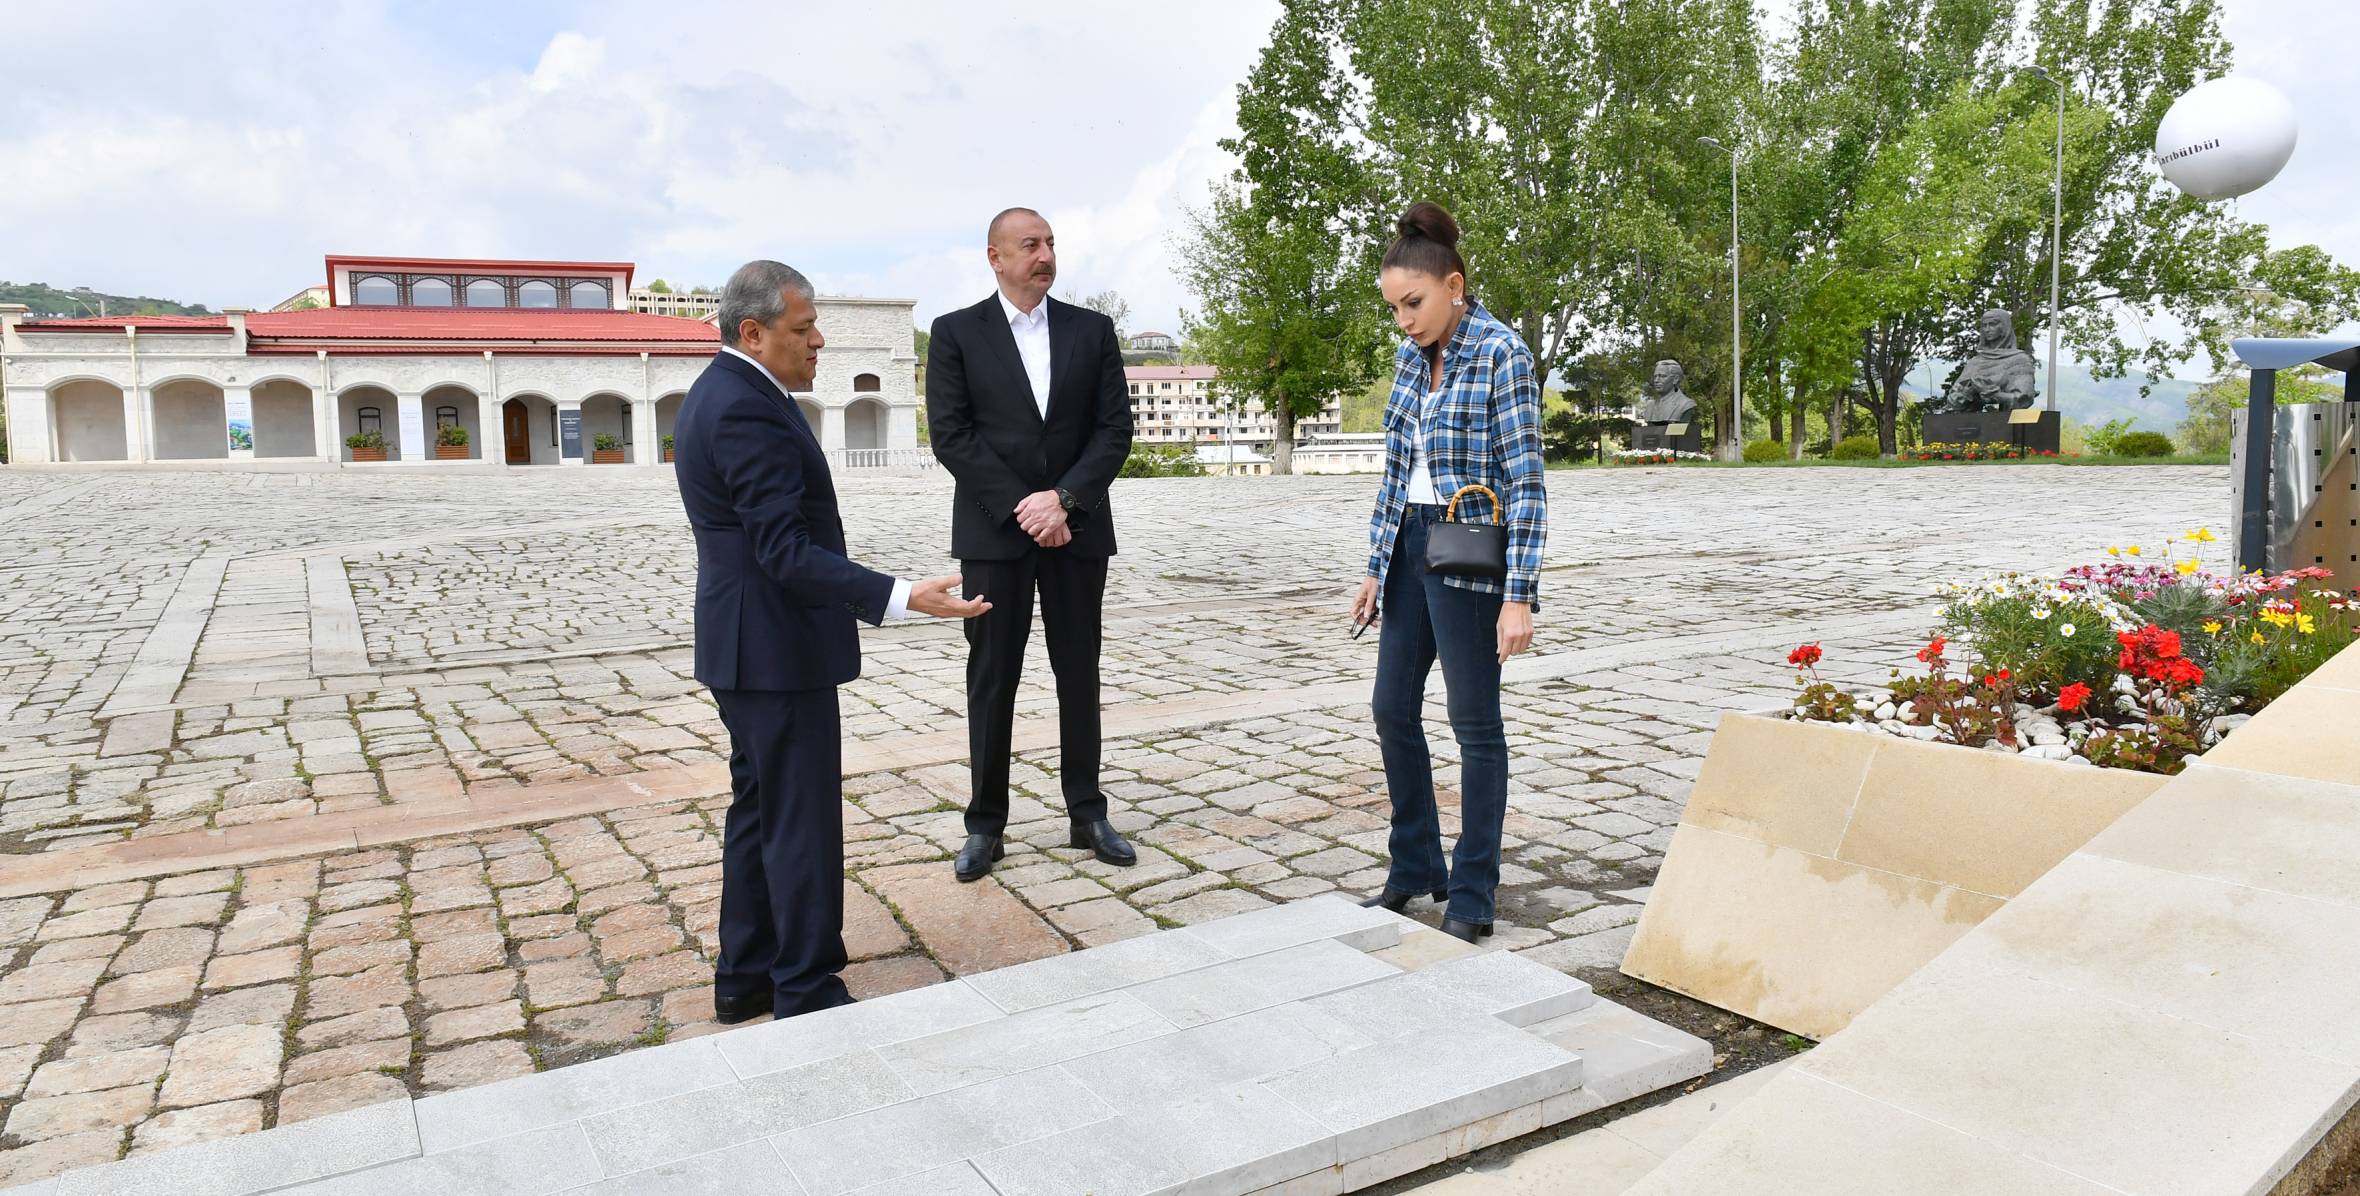 Ilham Aliyev and First Lady Mehriban Aliyeva examined works to be carried out in front of administrative building of Special Representative Office in Shusha